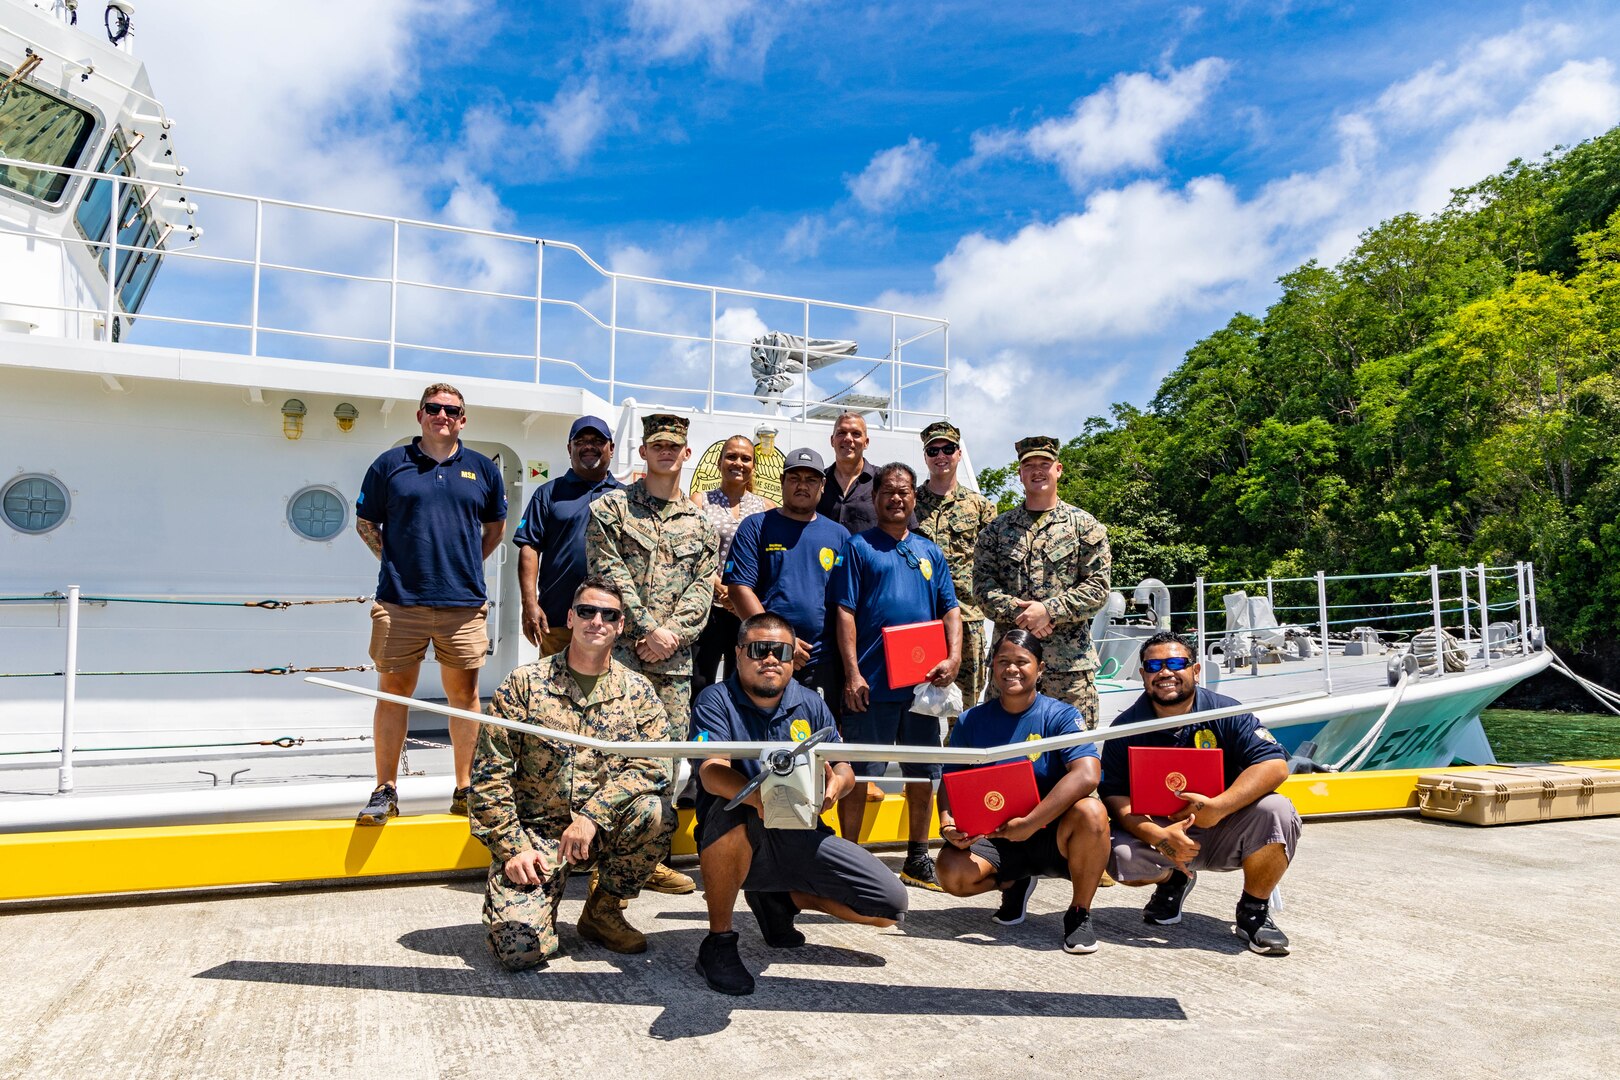 U.S. Marines with Task Force Koa Moana 23 and Palauan Maritime Law Enforcement Officers pose for a photograph at the conclusion of the Task Force Koa Moana RQ-20B Puma Training Course graduation at the Palau Joint Operations Center, Bureau of Maritime Security and Fish & Wildlife Protection, Koror, Palau, Sept. 14, 2023. Task Force Koa Moana 23, composed of U.S. Marines and Sailors from I Marine Expeditionary Force, deployed to the Indo-Pacific to strengthen relationships with Pacific Island partners through bilateral and multilateral security cooperation and community engagements. (U.S. Marine Corps photo by Staff Sgt. Courtney G. White)